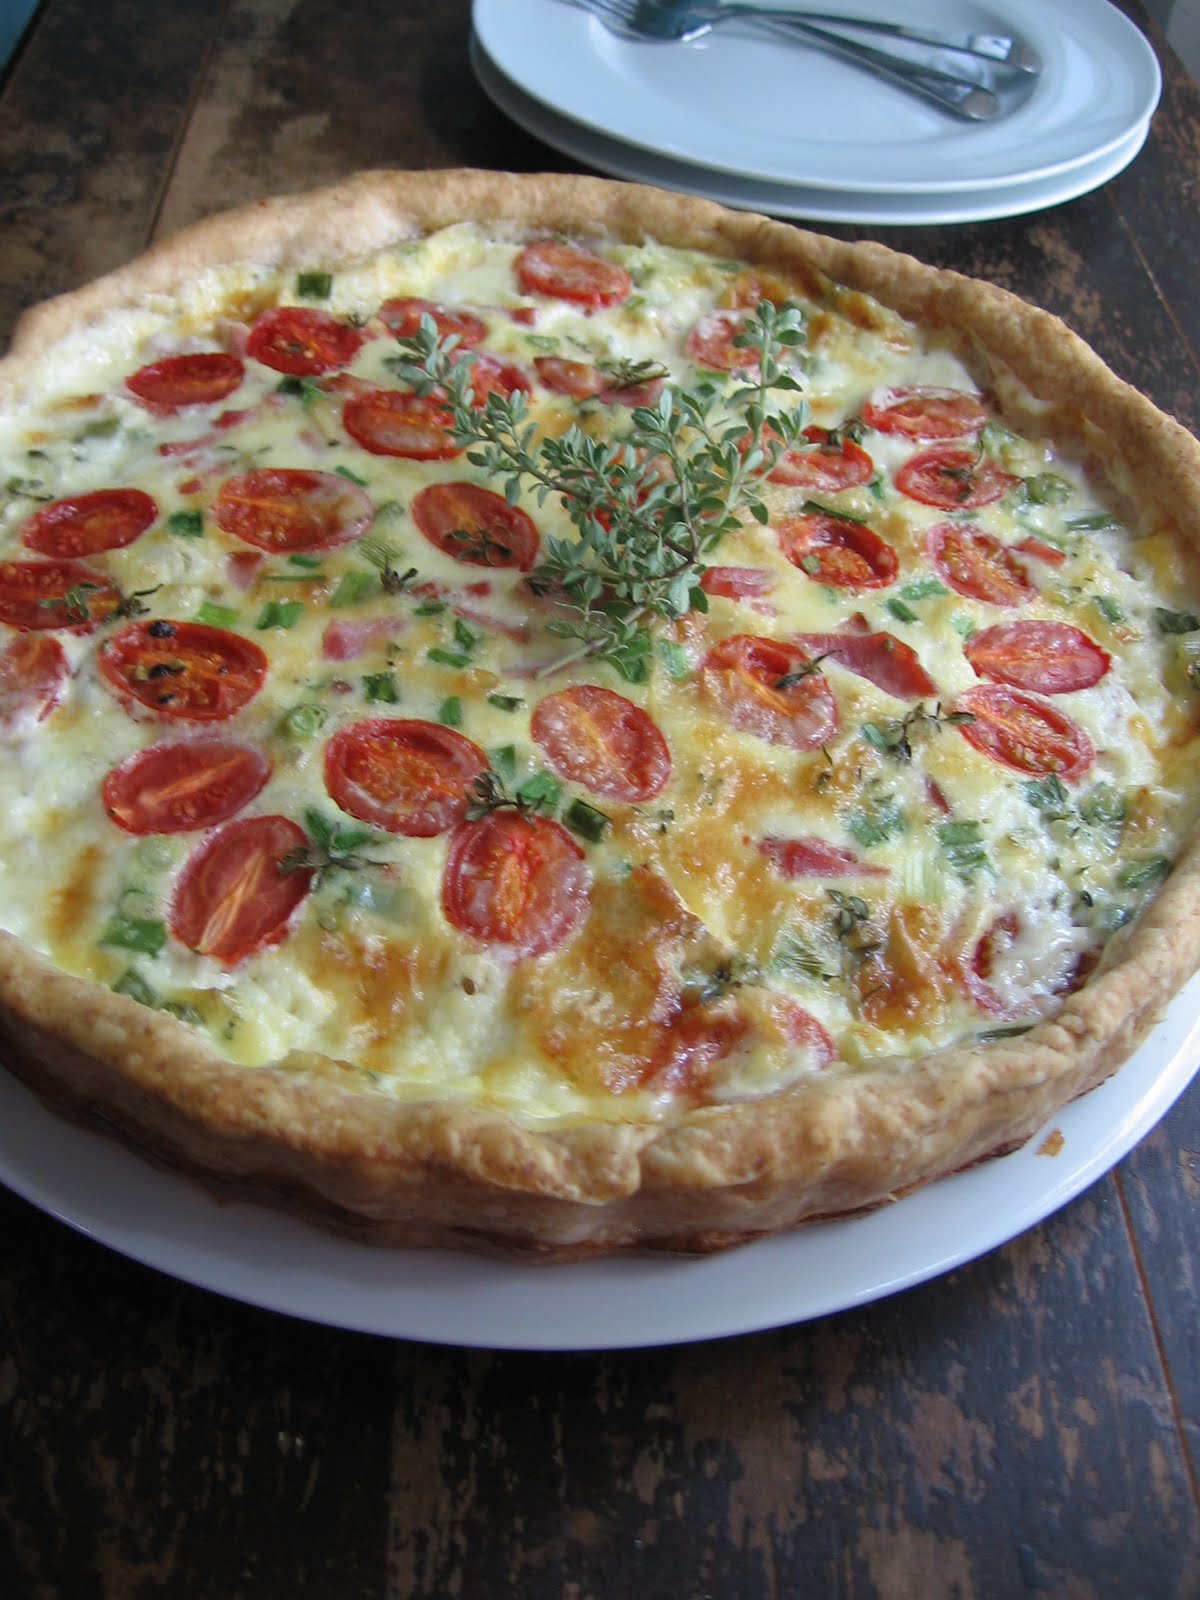 sweetsugarbean: Rustic Ham and Brie Tart With Grape Tomatoes and Thyme